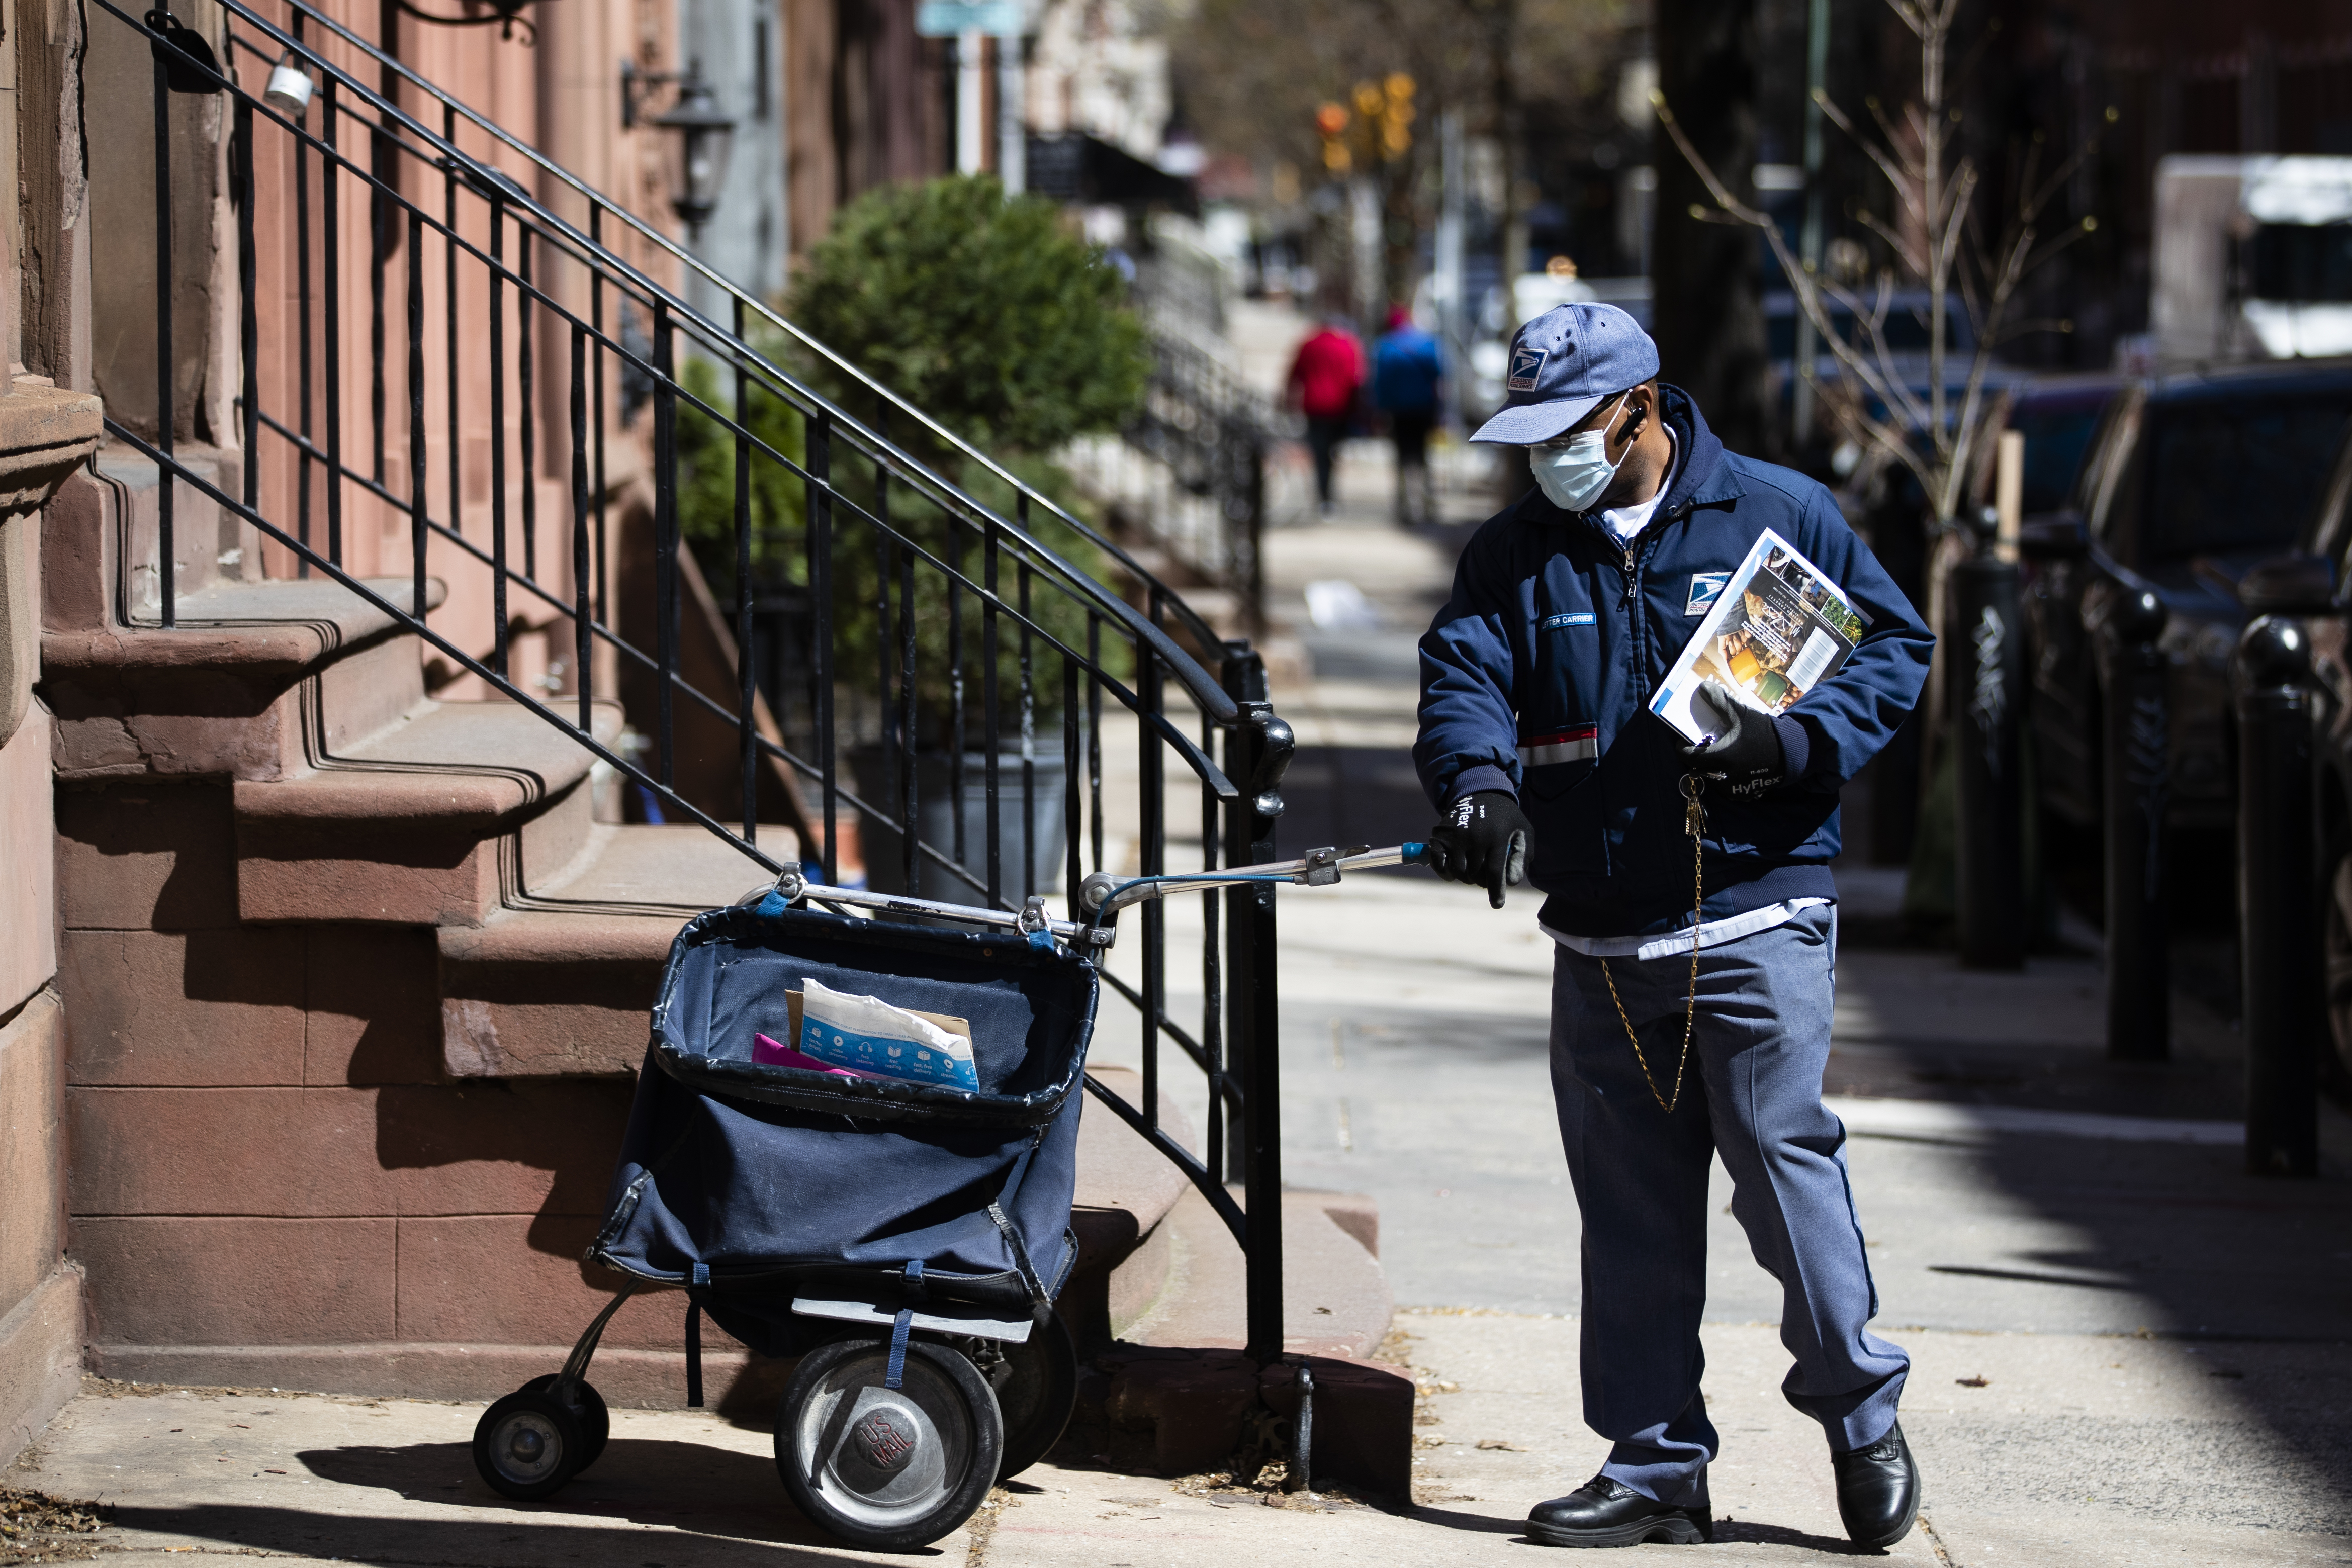 A United States Postal worker makes a delivery with gloves and a mask in Philadelphia, Thursday, April 2, 2020. The U.S. Postal Service is keeping post offices open but ensuring customers stay at least 6 feet (2 meters) apart. The agency said it is following guidance from public health experts, although there is no indication that the new coronavirus COVID-19 is being spread through the mail. (AP Photo/Matt Rourke)